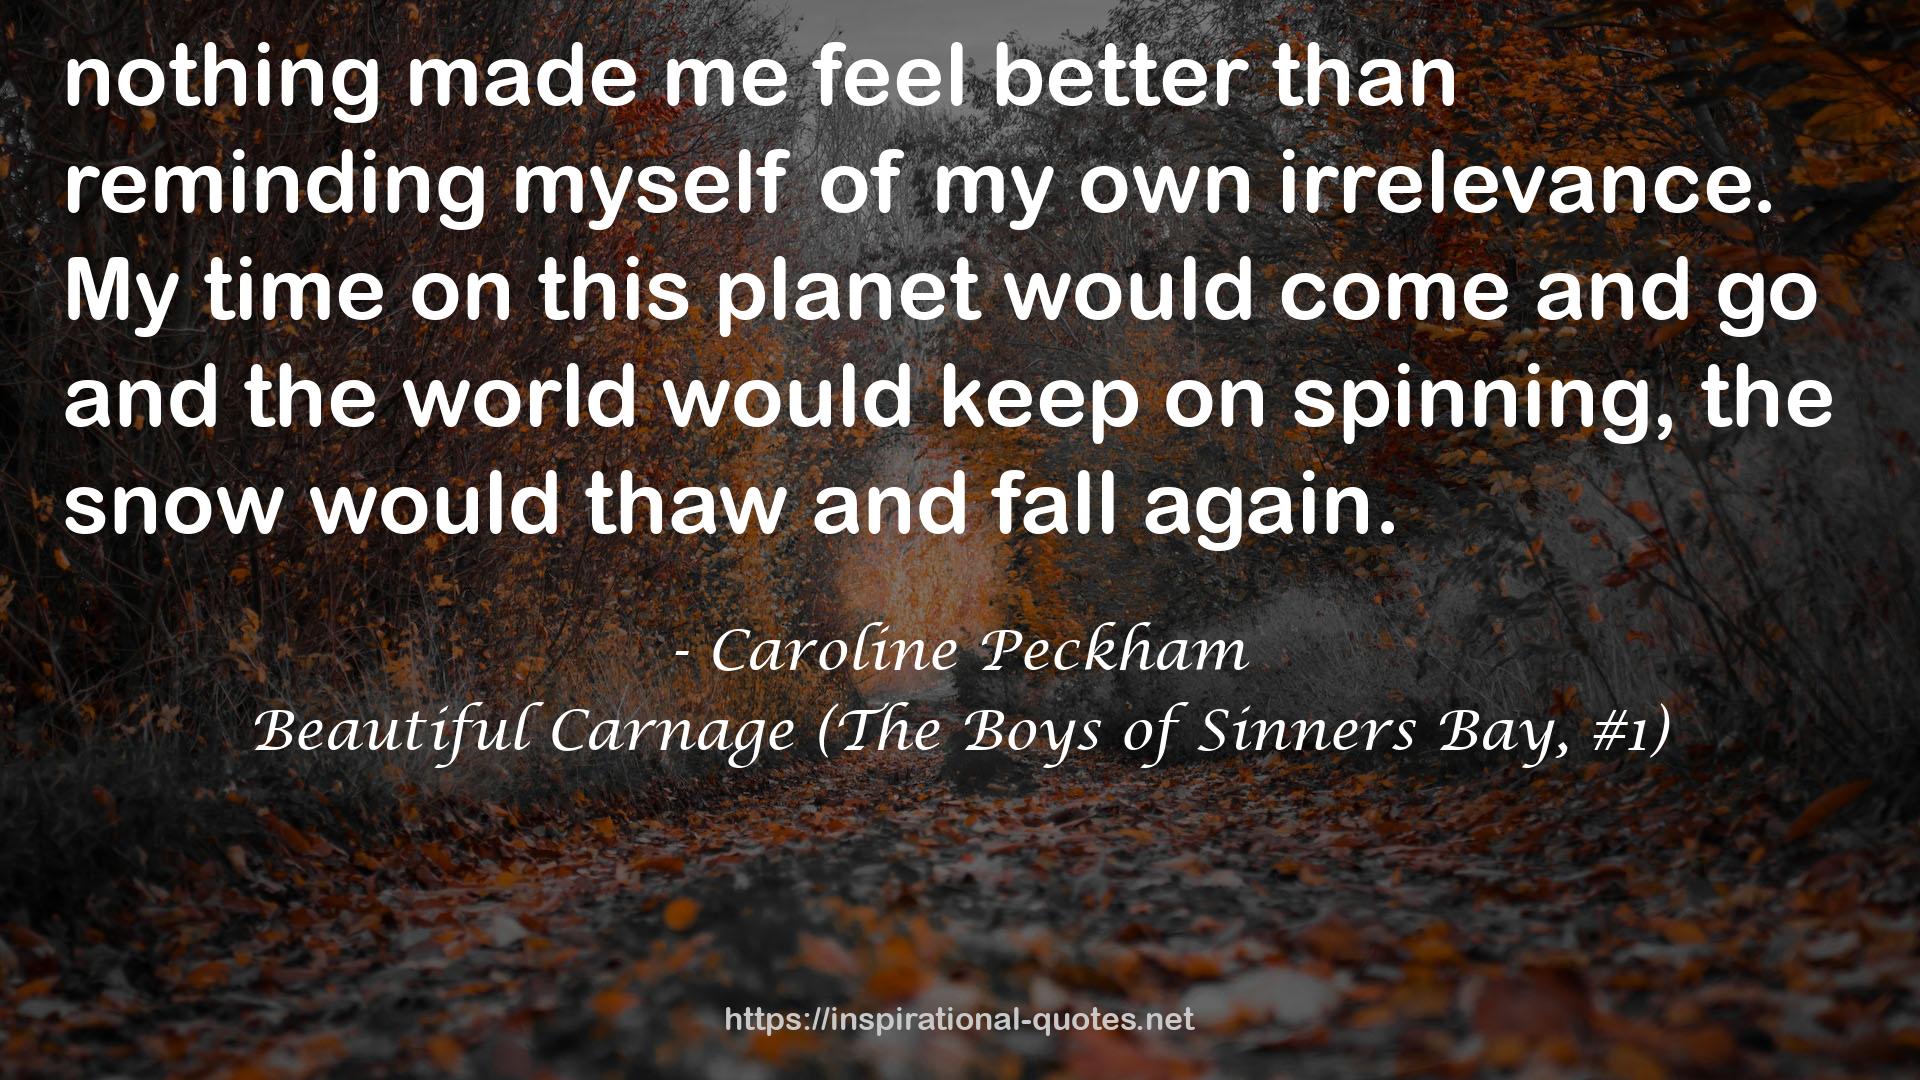 Beautiful Carnage (The Boys of Sinners Bay, #1) QUOTES